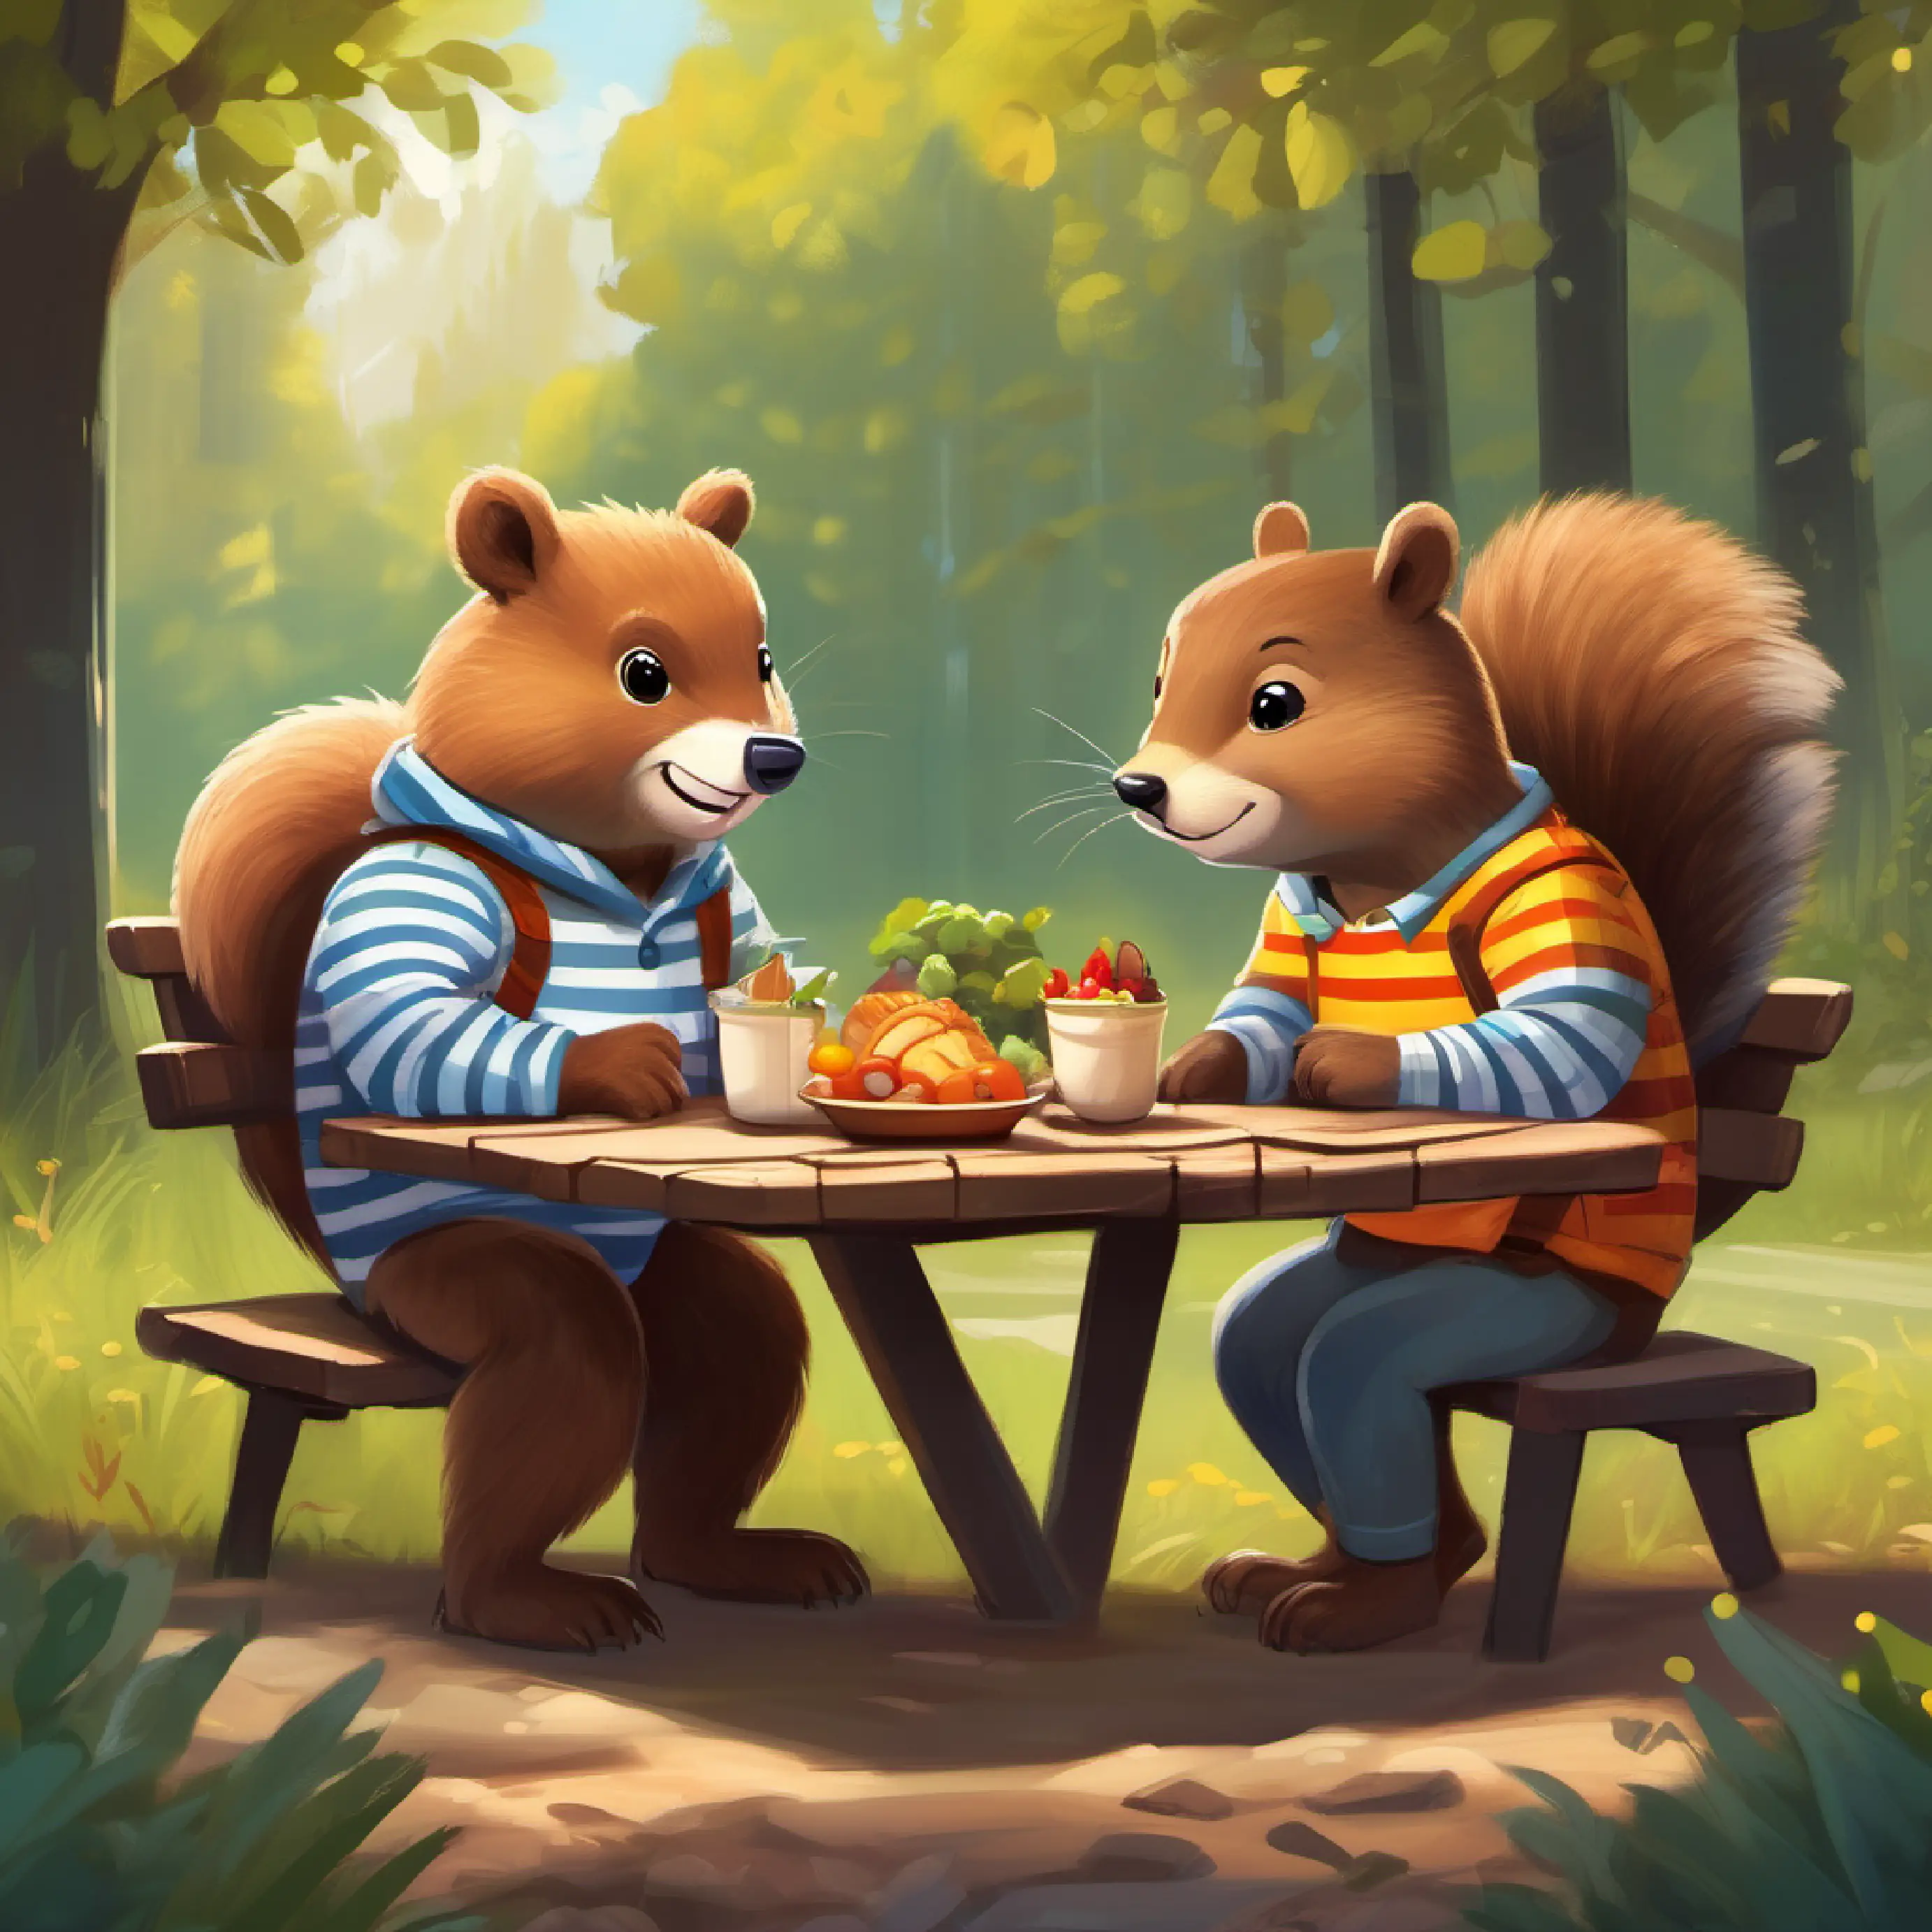 Brown bear with a bright smile and a striped shirt, brown eyes and Grey squirrel with a shy demeanor, dark eyes share their lunch.